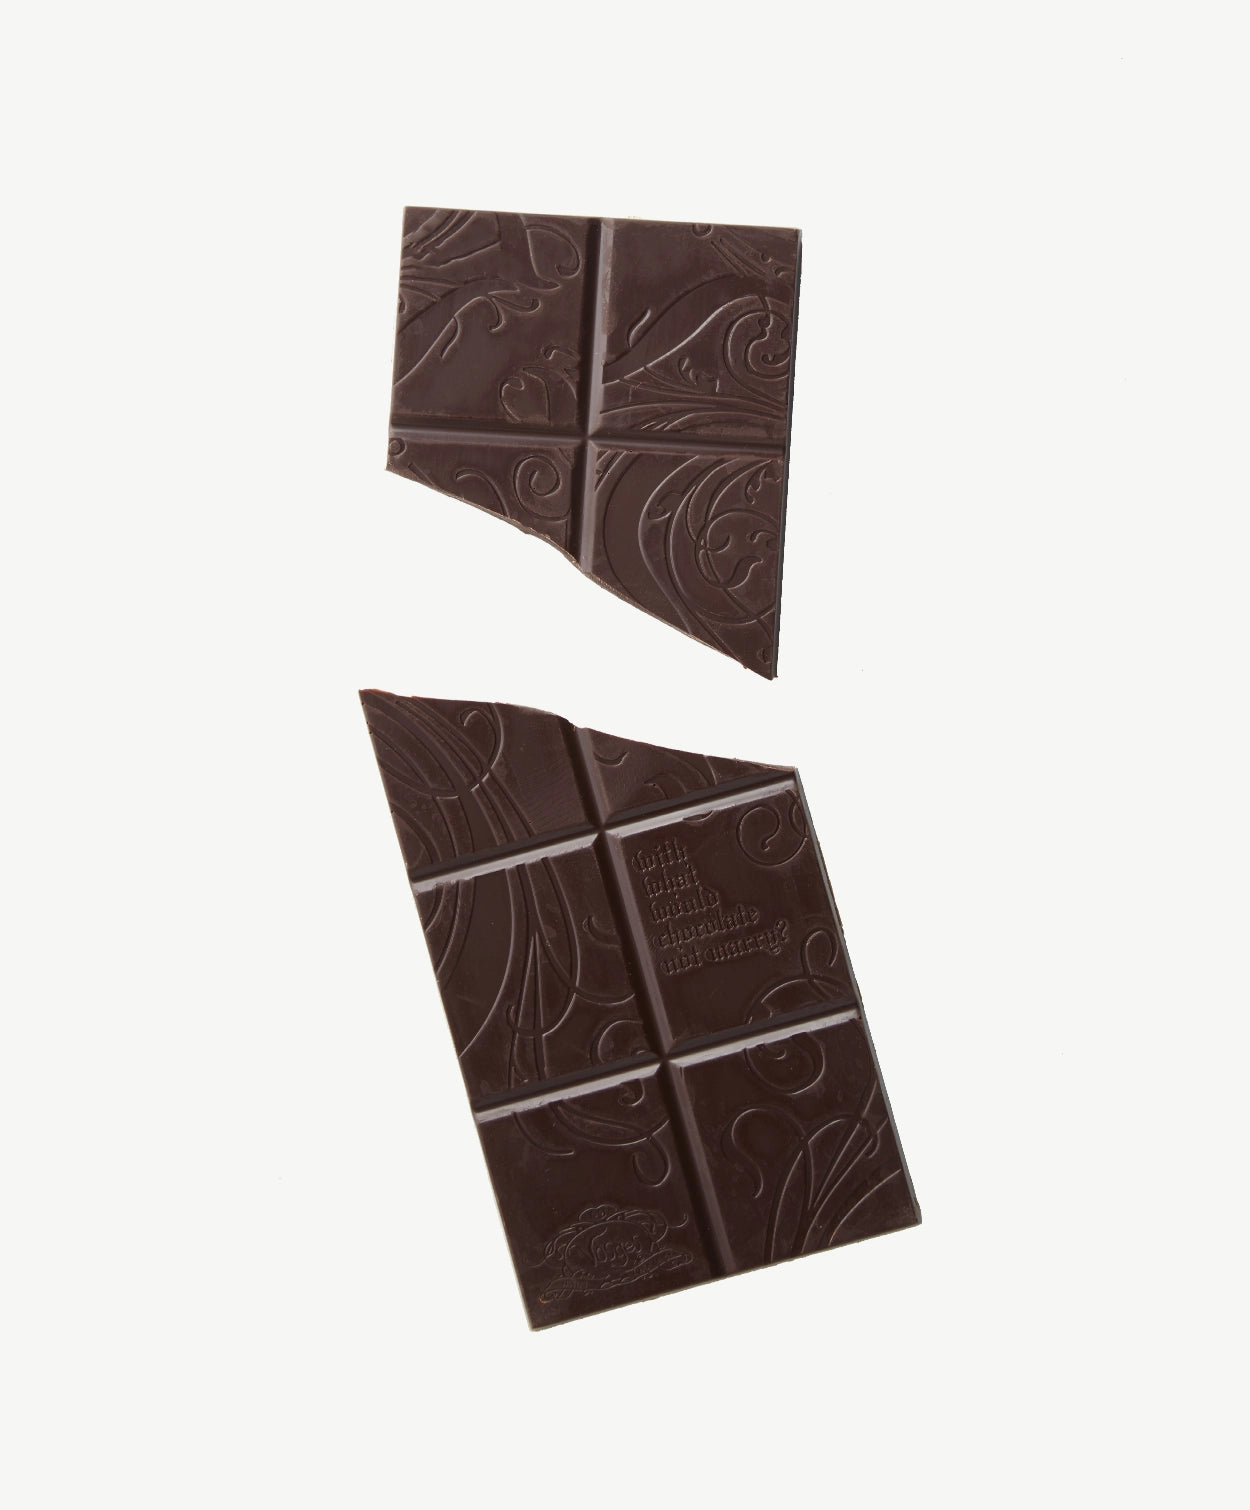 Close-up view of a Vosges Chocolate bar unwrapped on a light grey background.